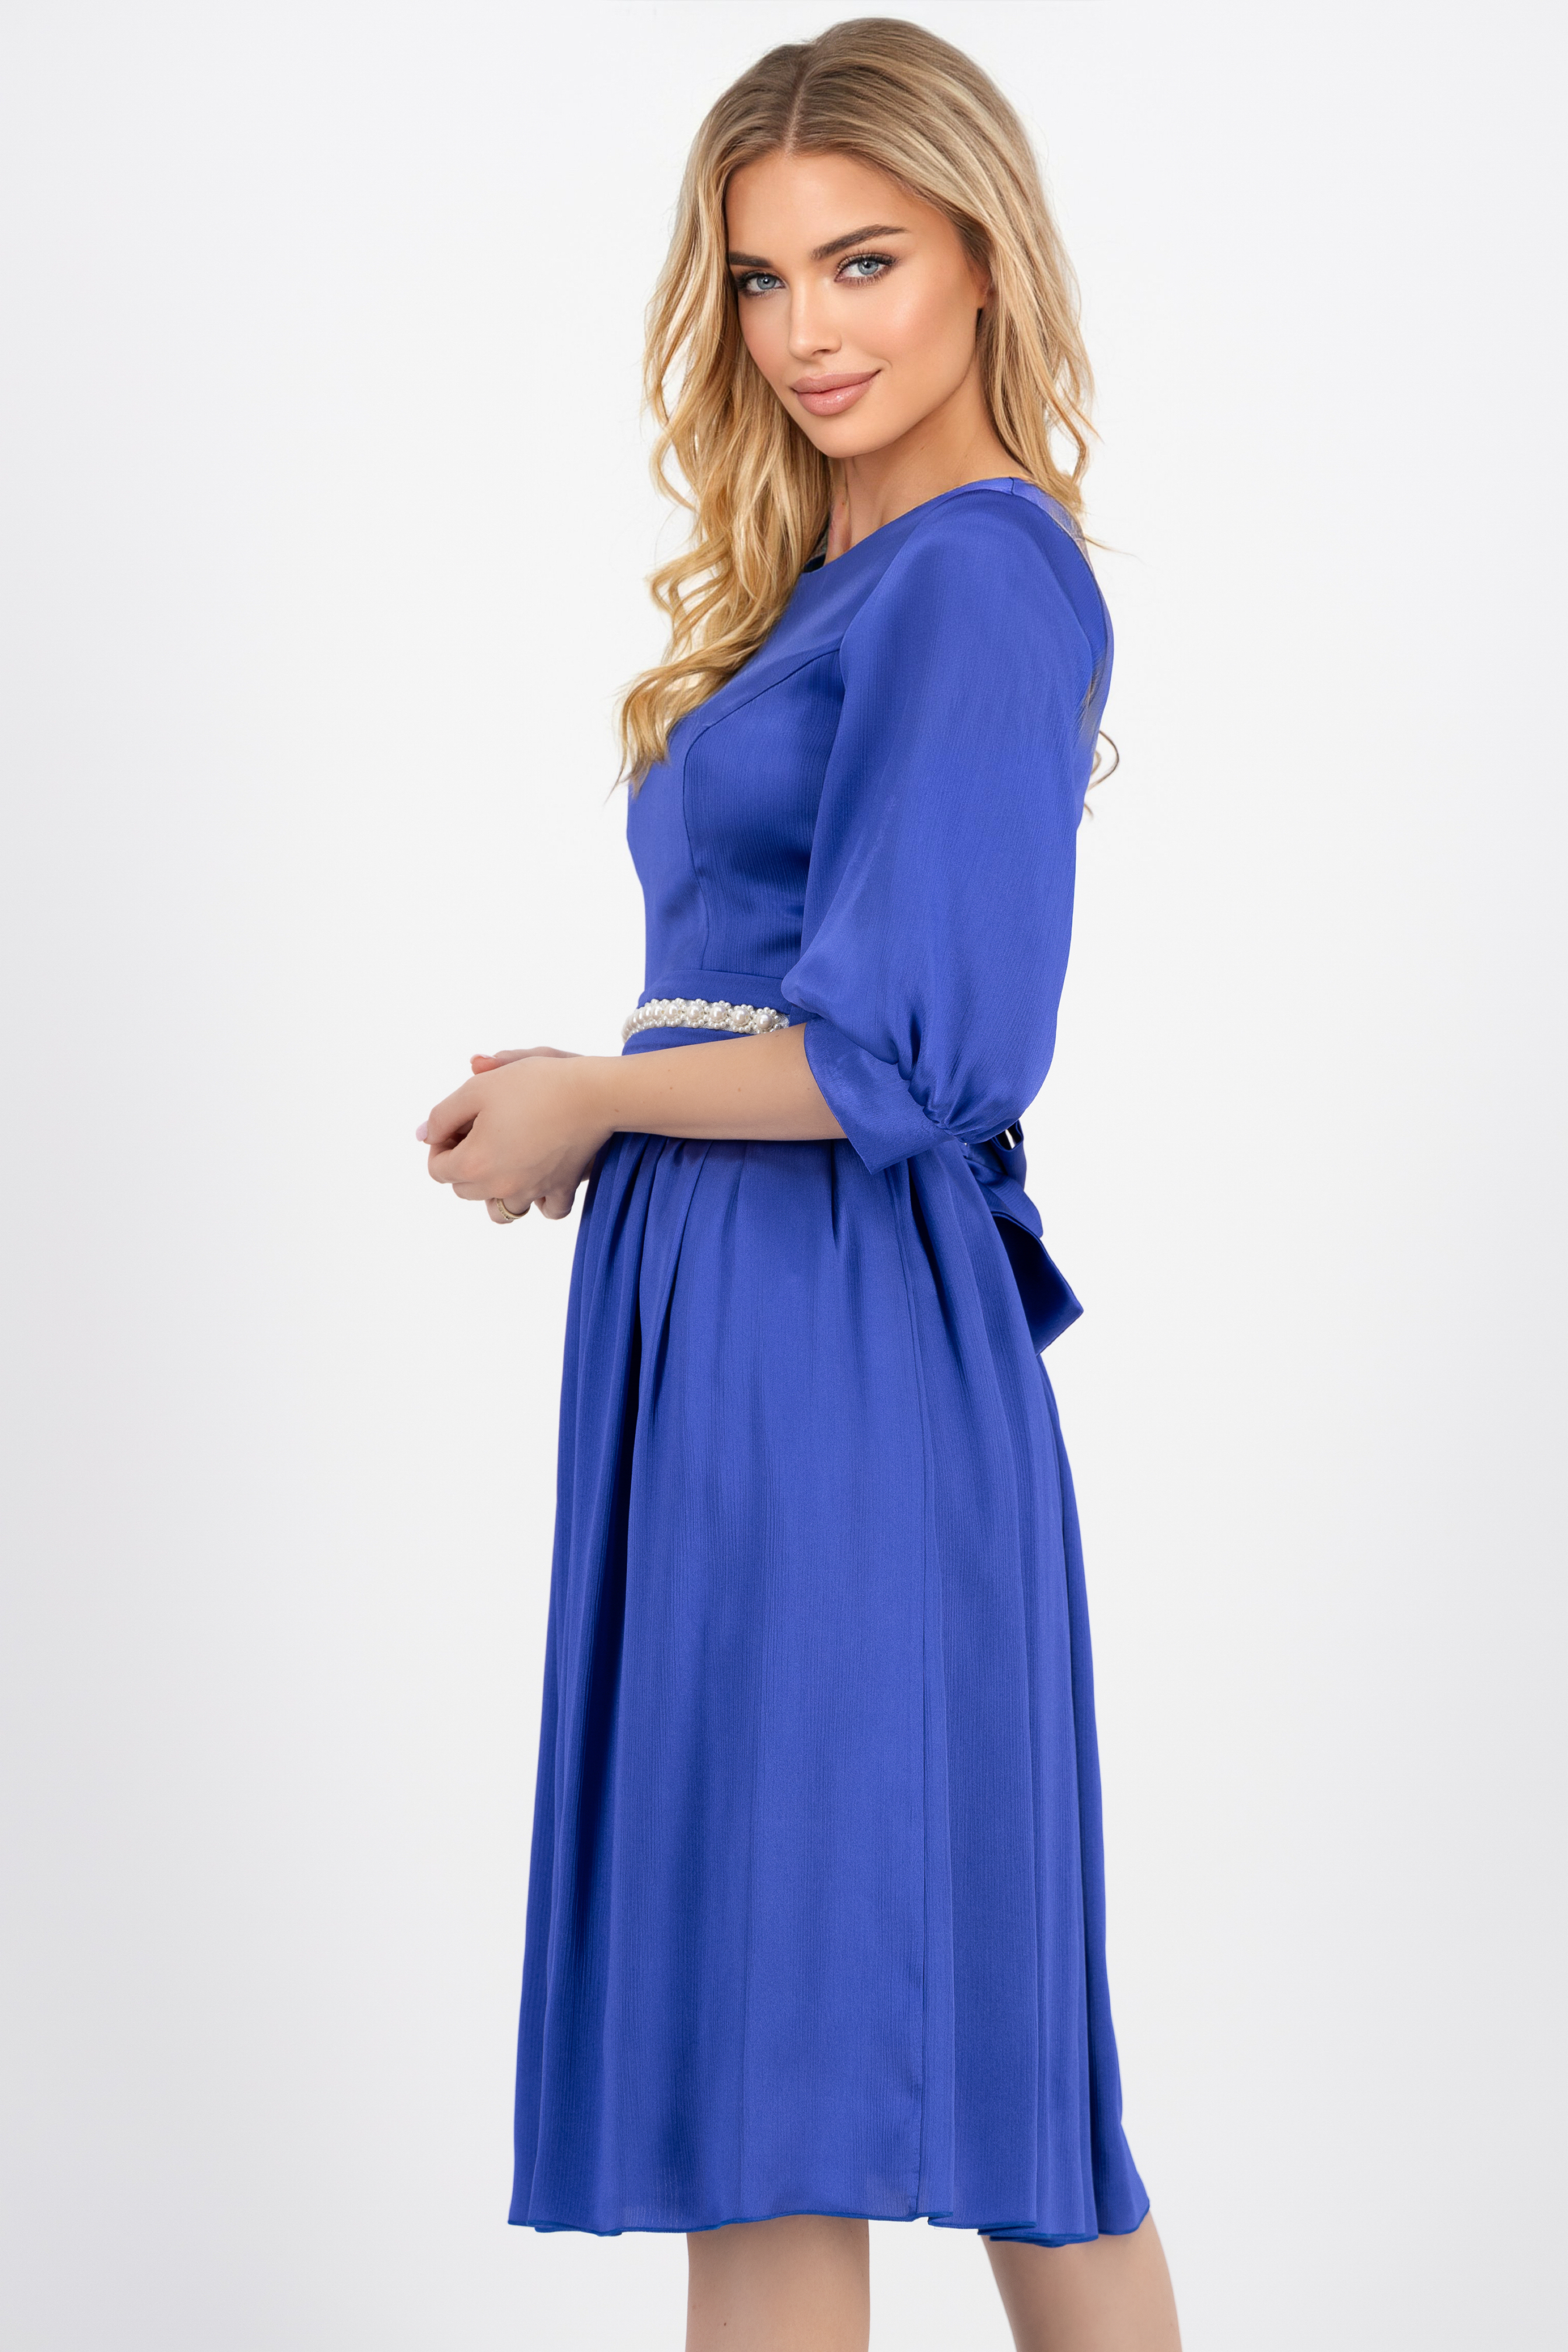 Blue satin midi dress in flared style with pearl appliques on cord - StarShinerS 2 - StarShinerS.com